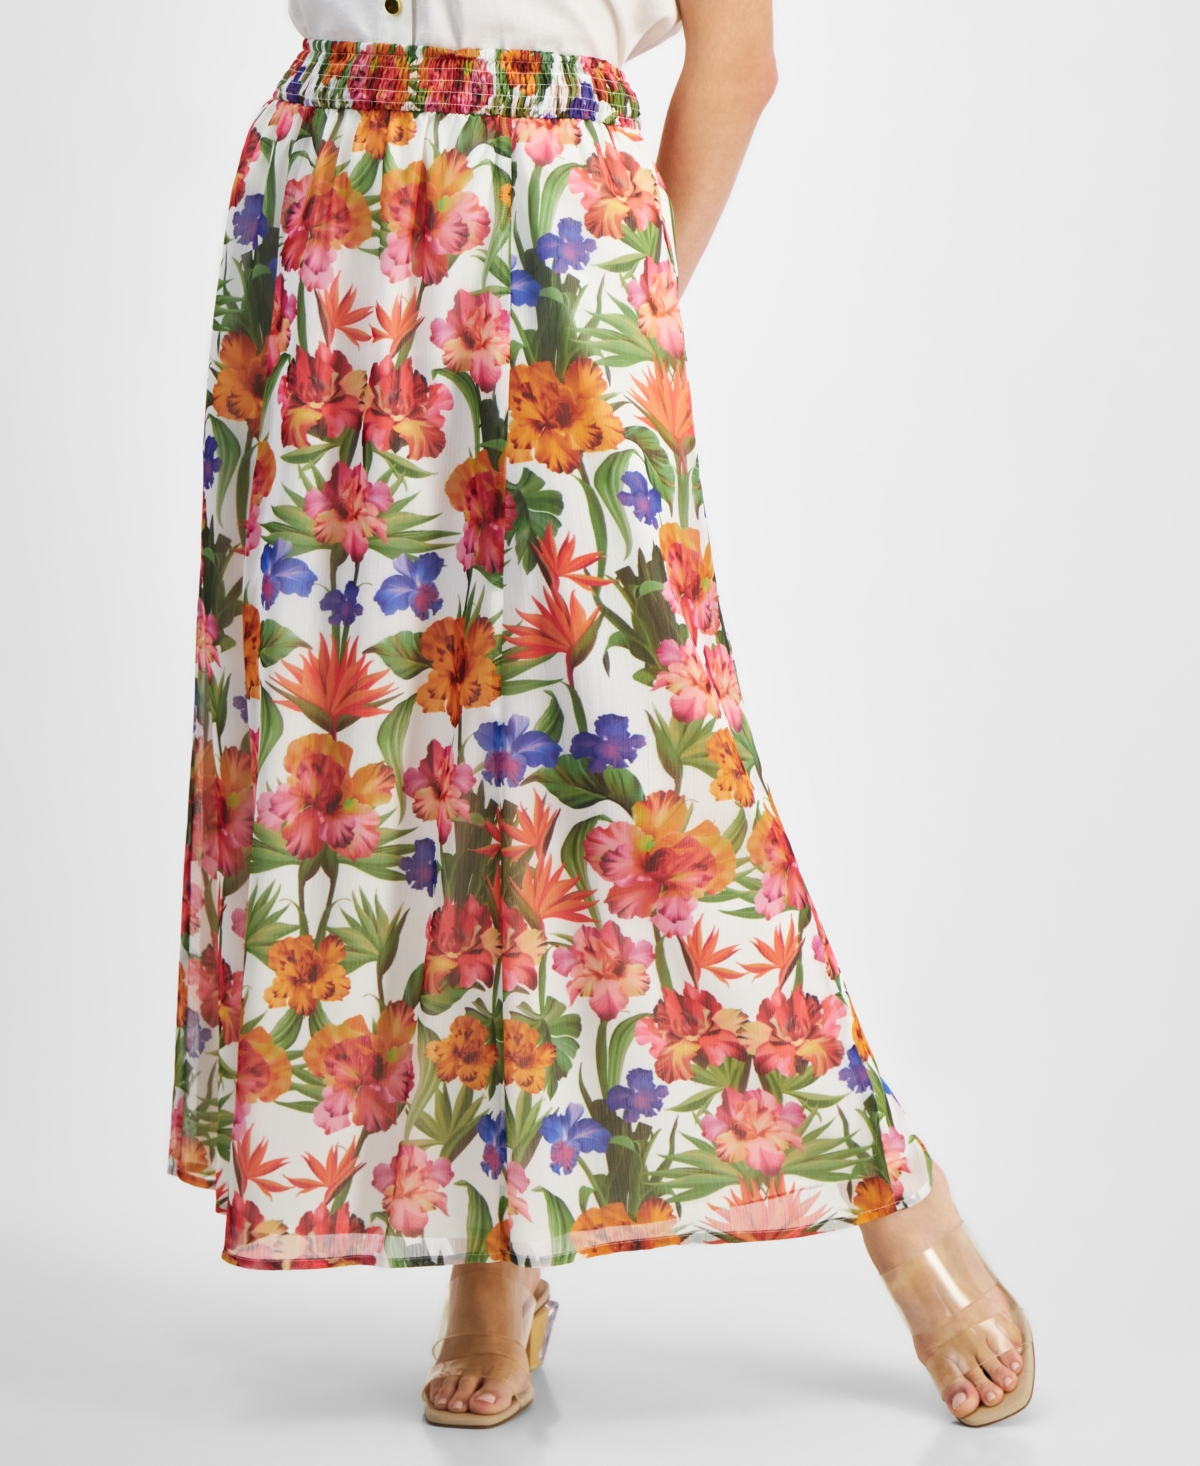 Petite Textured Floral-Print Maxi Skirt, Created for Macy's - Marini